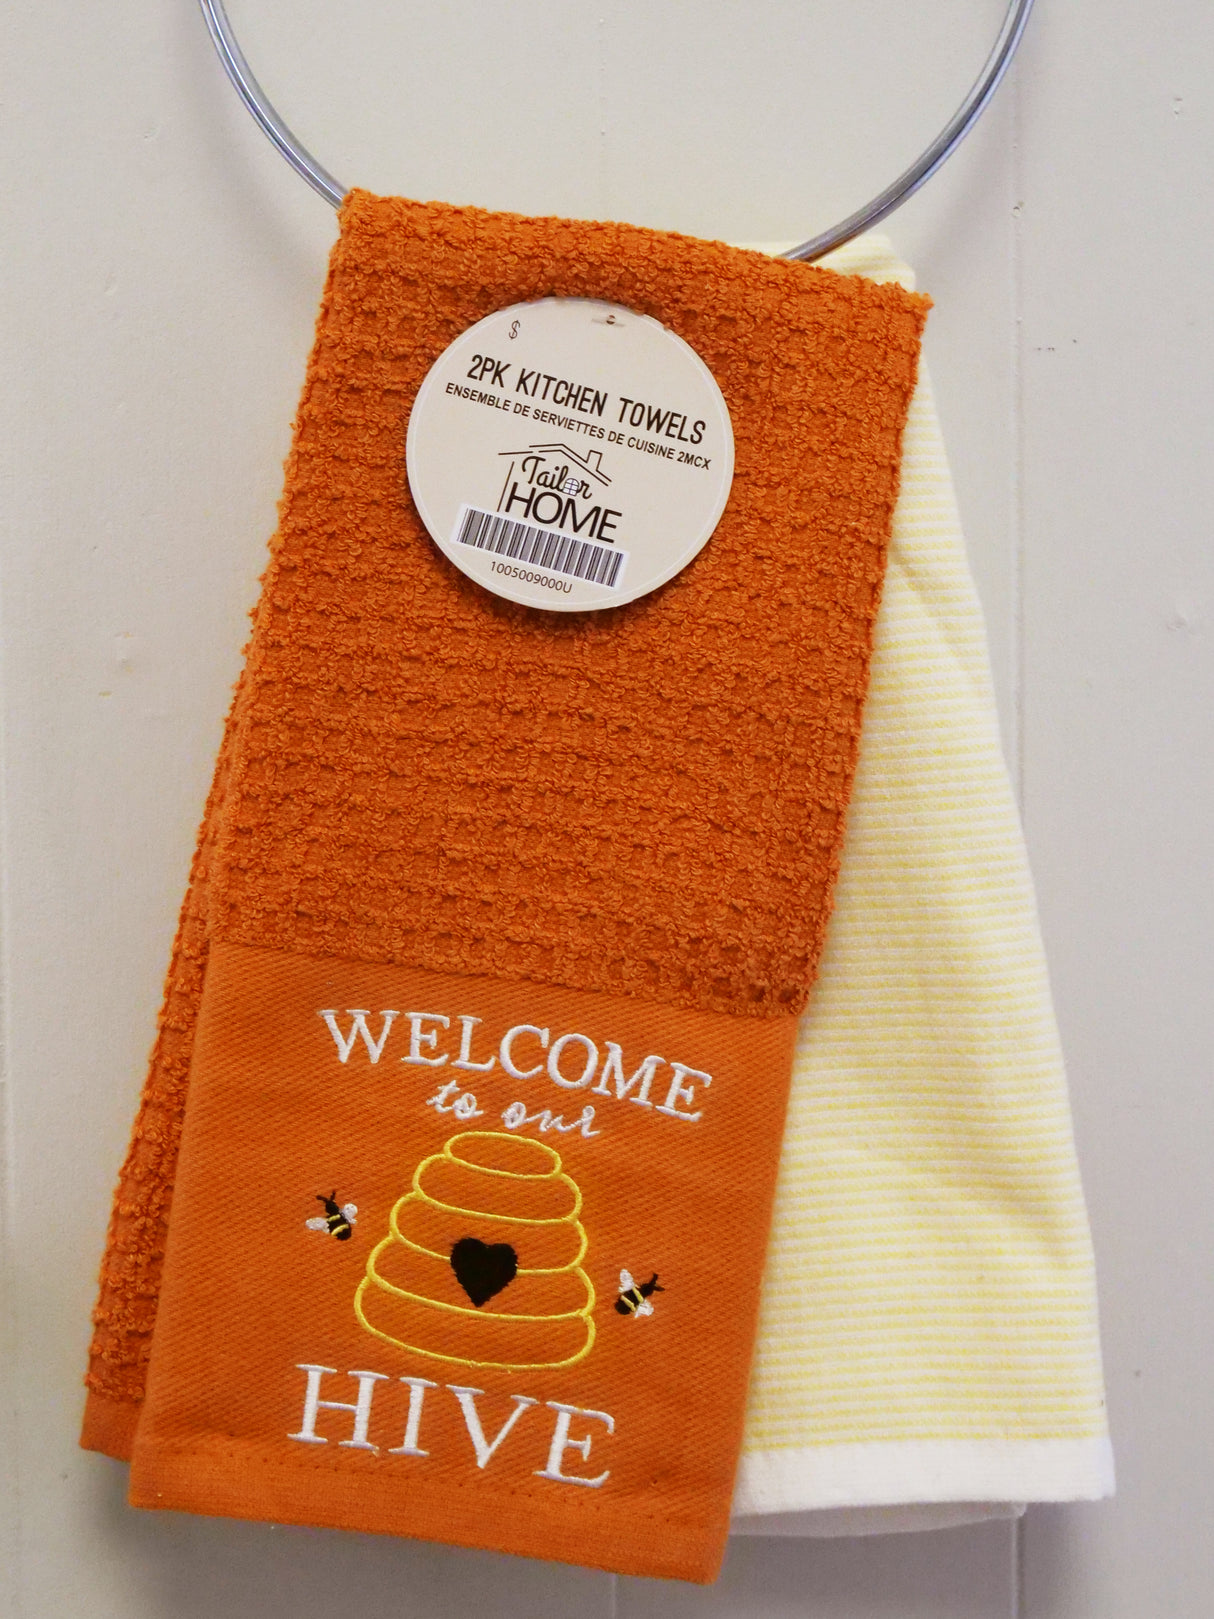 2PK KITCHEN TOWELS - WELCOME